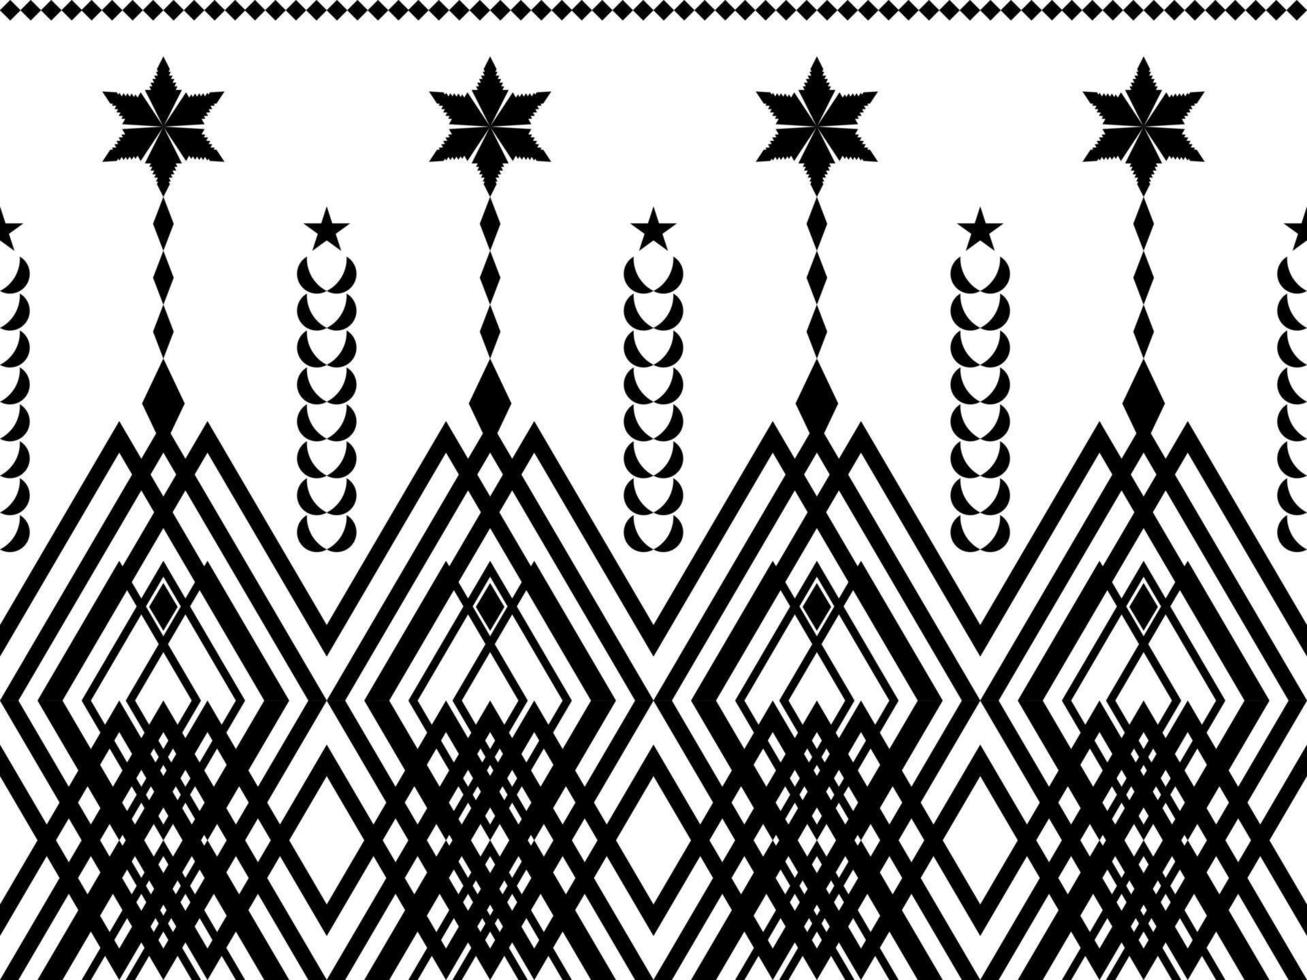 Abstract ethnic geometric pattern design for background or wallpaper.Ethnic geometric print pattern design Aztec repeating background texture in black and white. Fabric, cloth design, wrapping vector